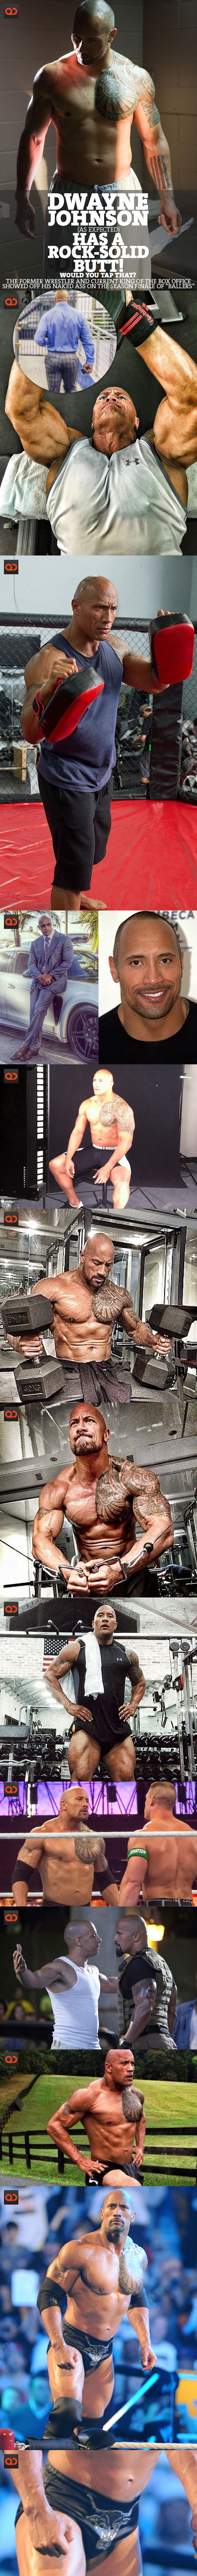 Dwayne Johnson, As Expected, Has A Rock-Solid Butt! Would You Tap That?